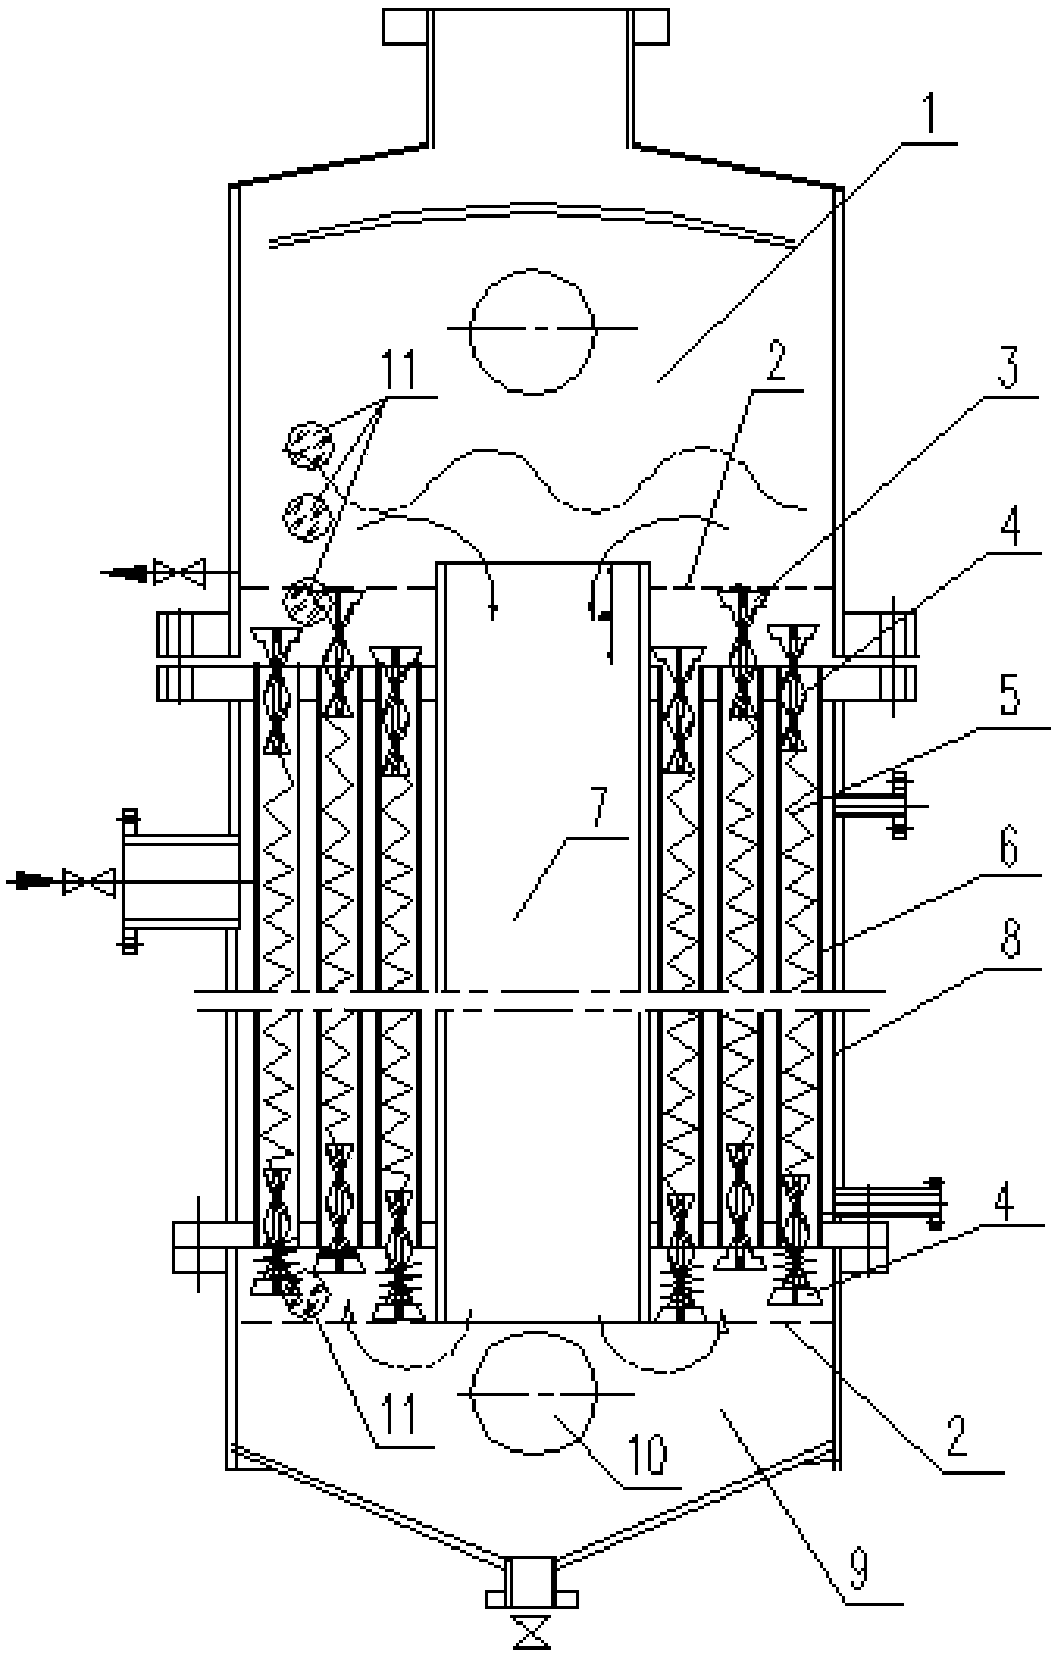 A three-screw self-cleaning natural circulation evaporator